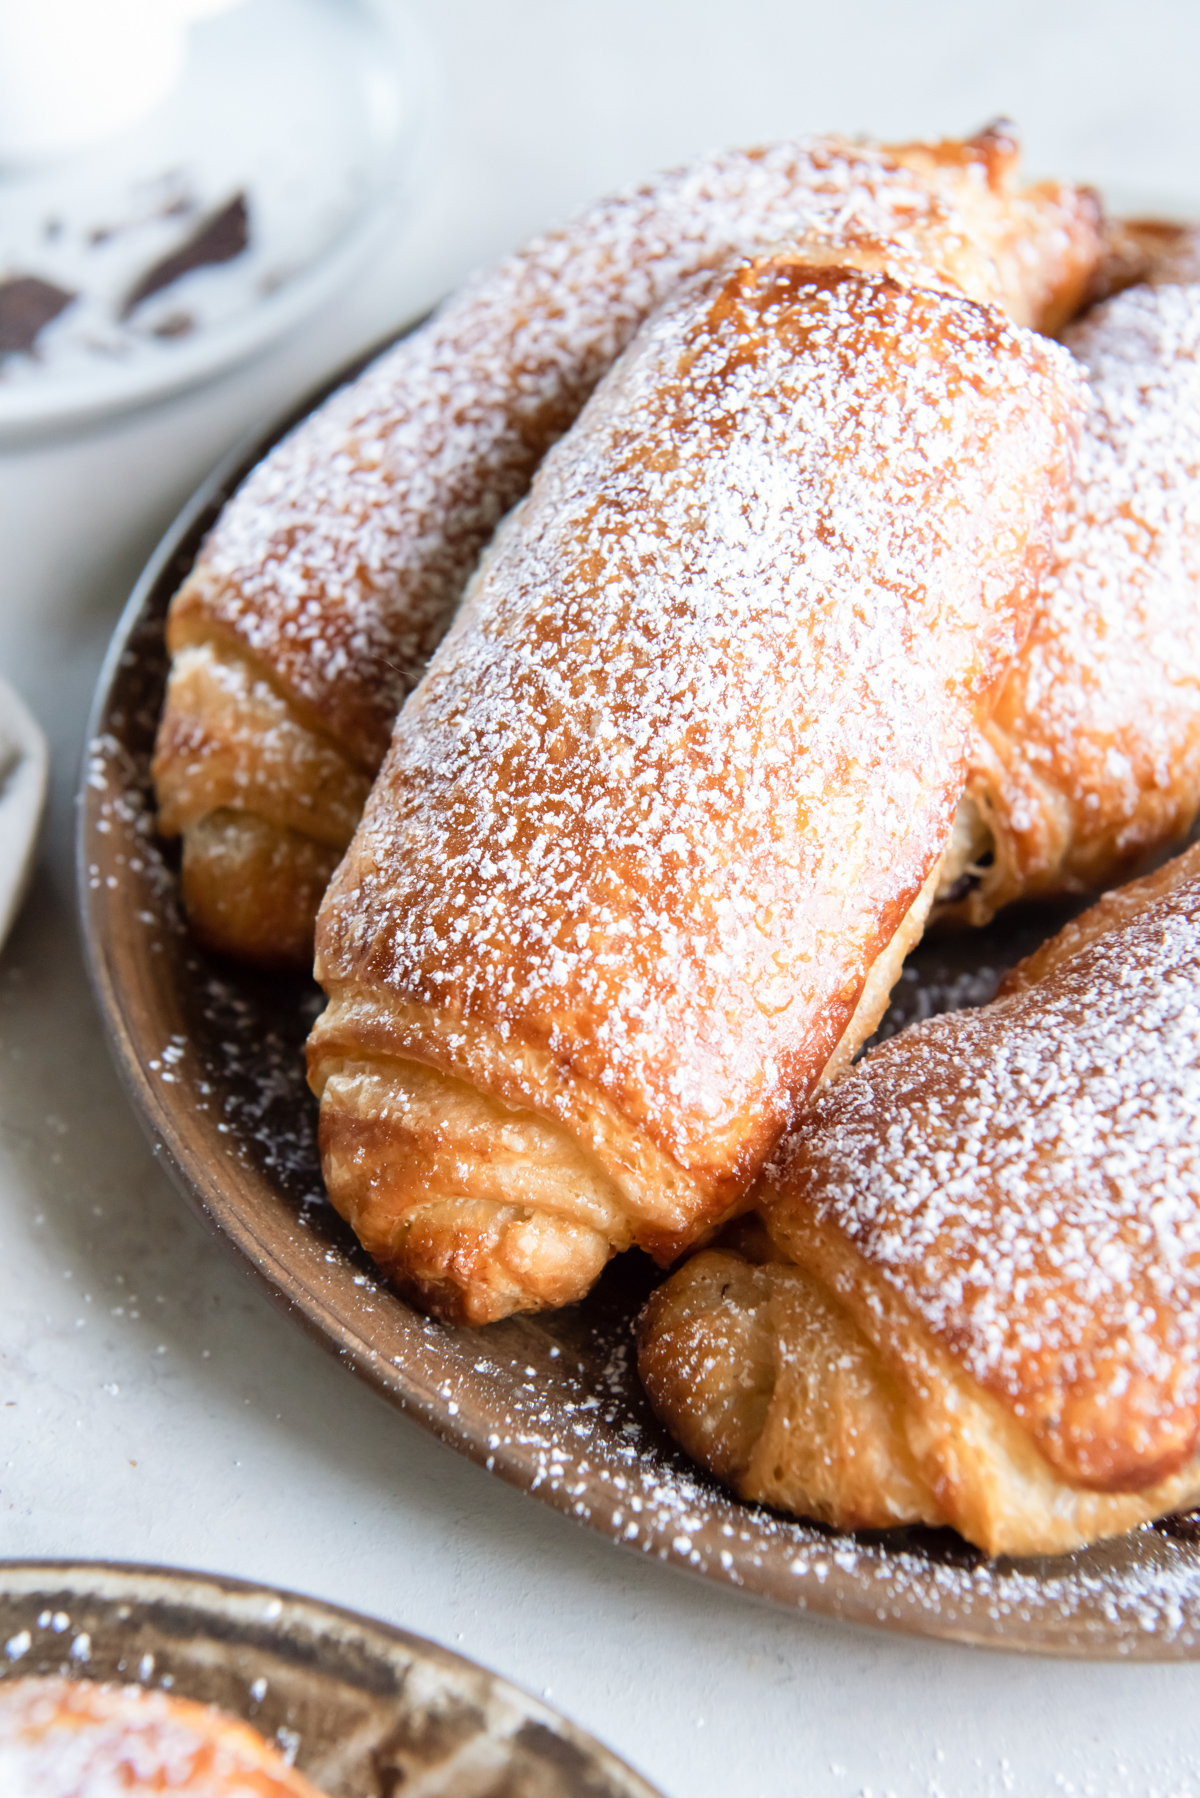 a tray of pain au chocolate, coated with powdered sugar